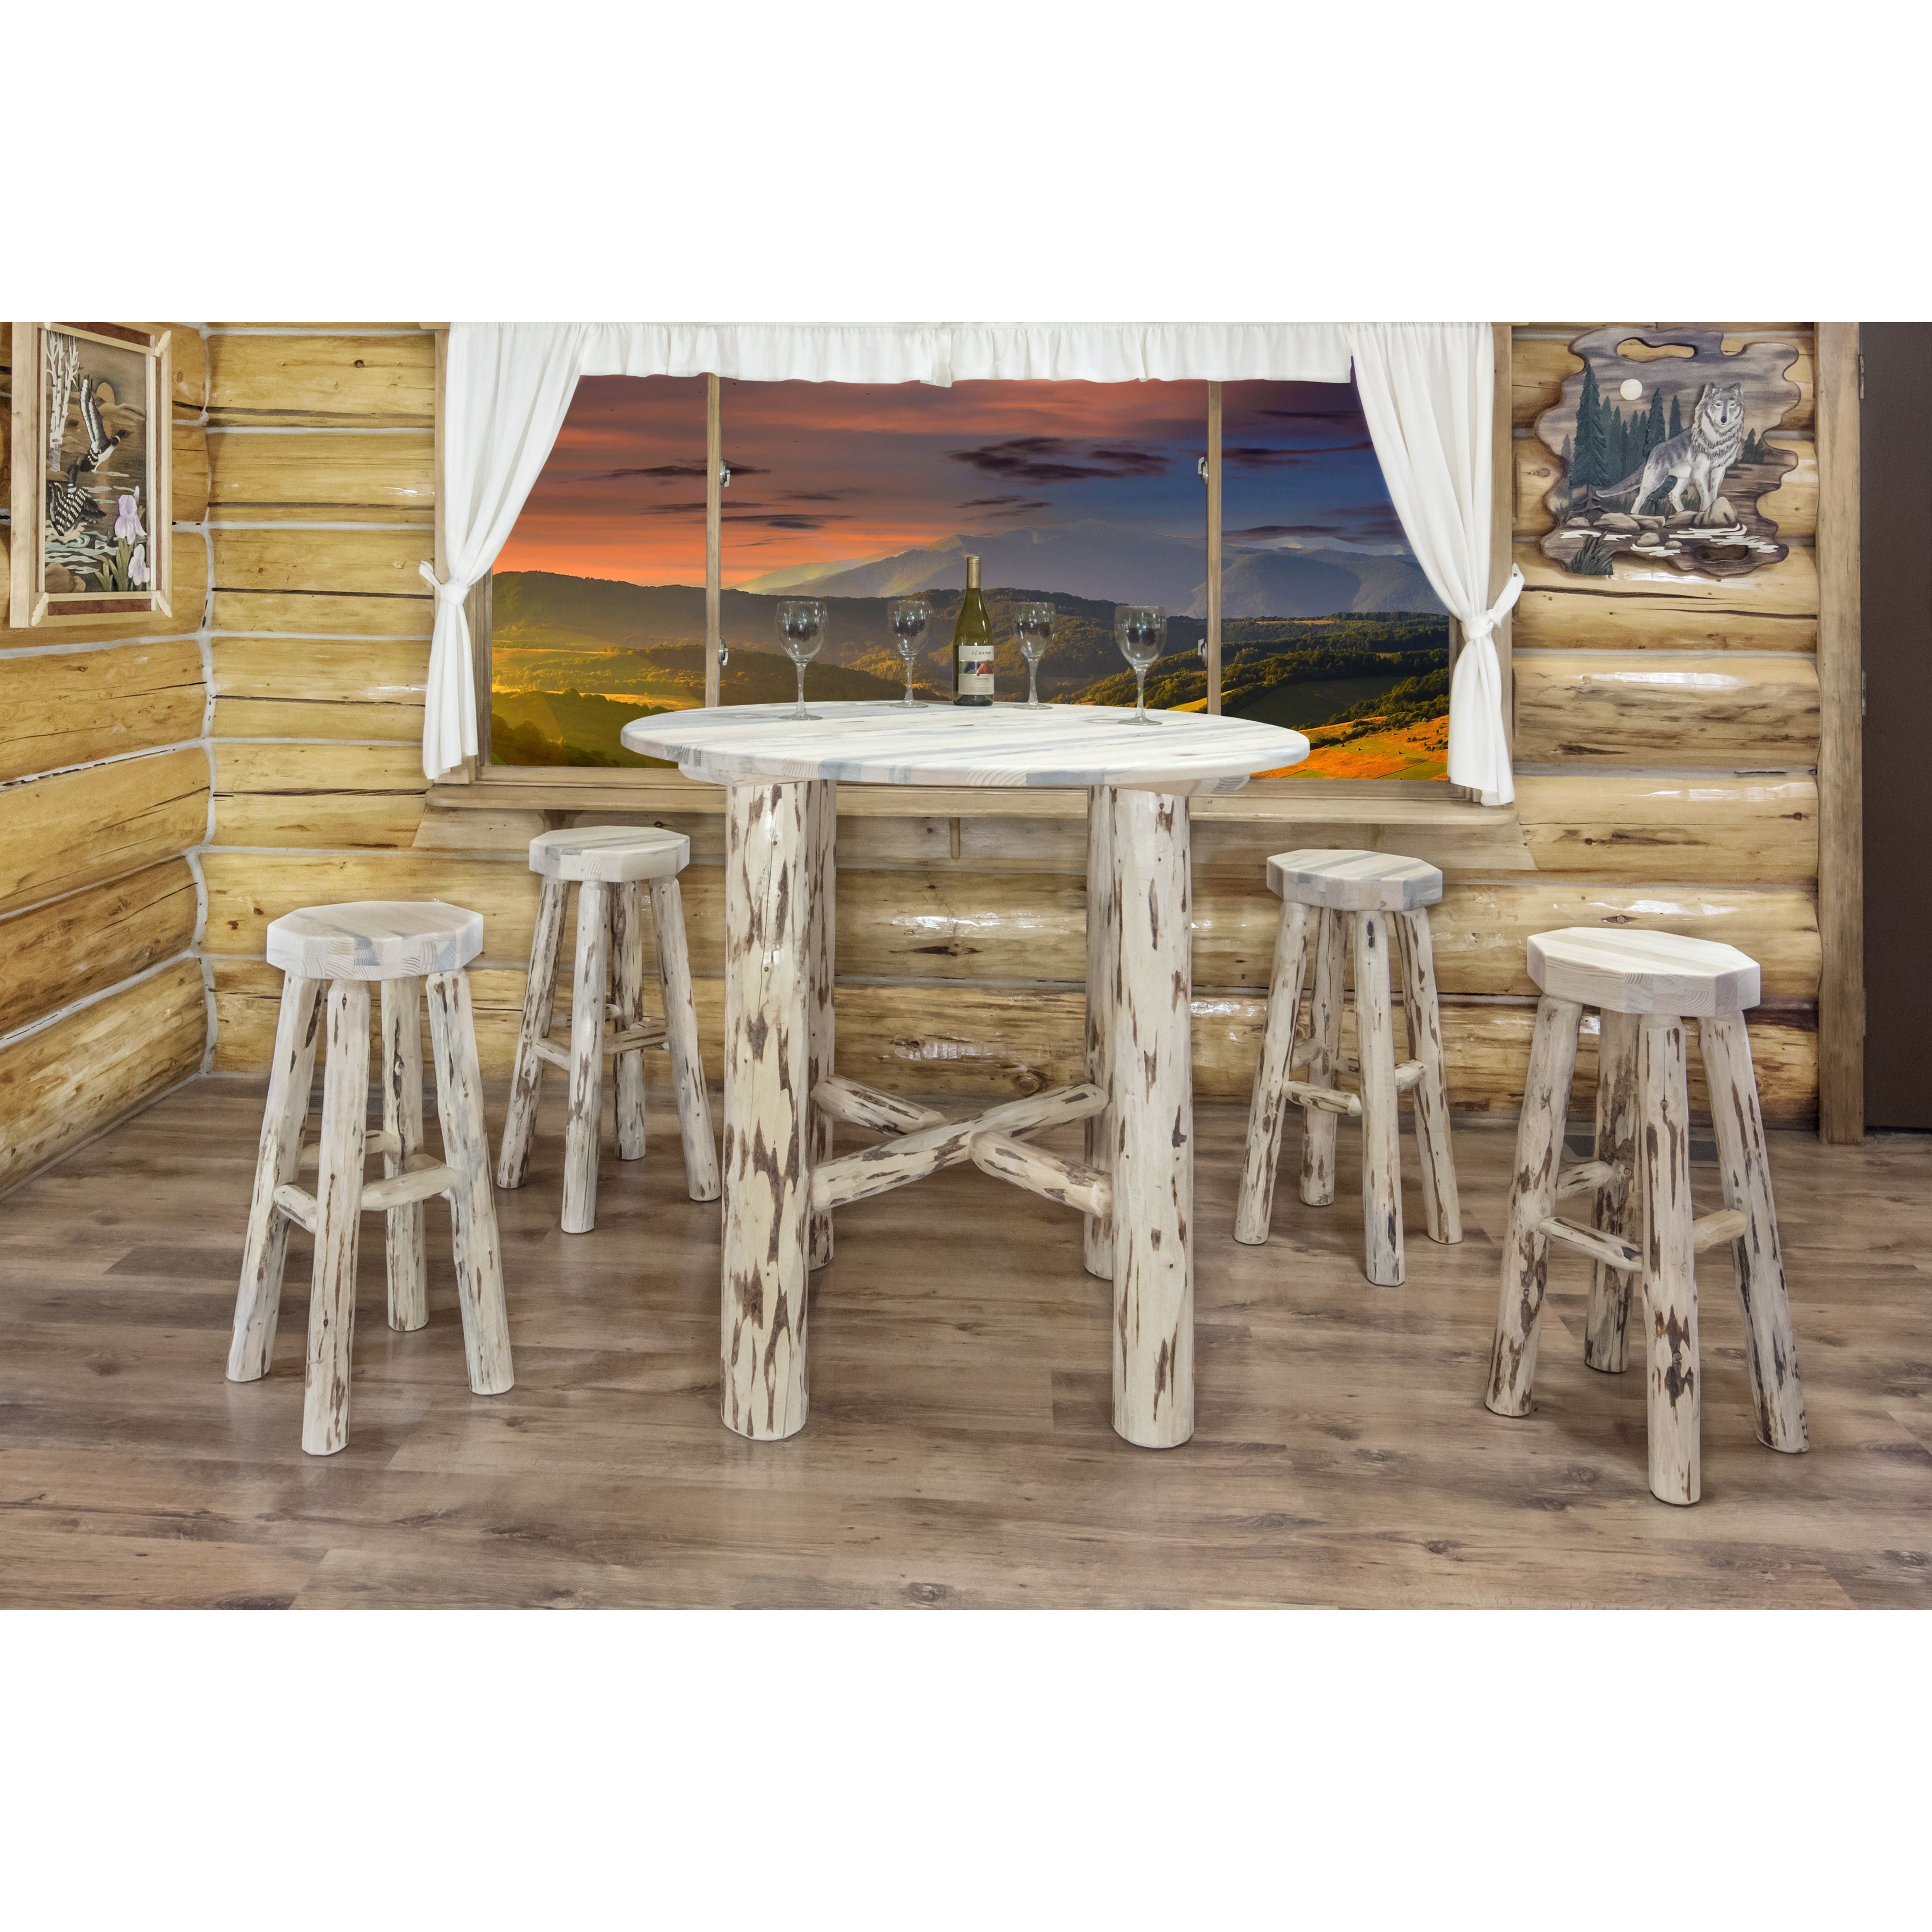 Montana Woodworks Collection MWBT Bistro Table With Chairs